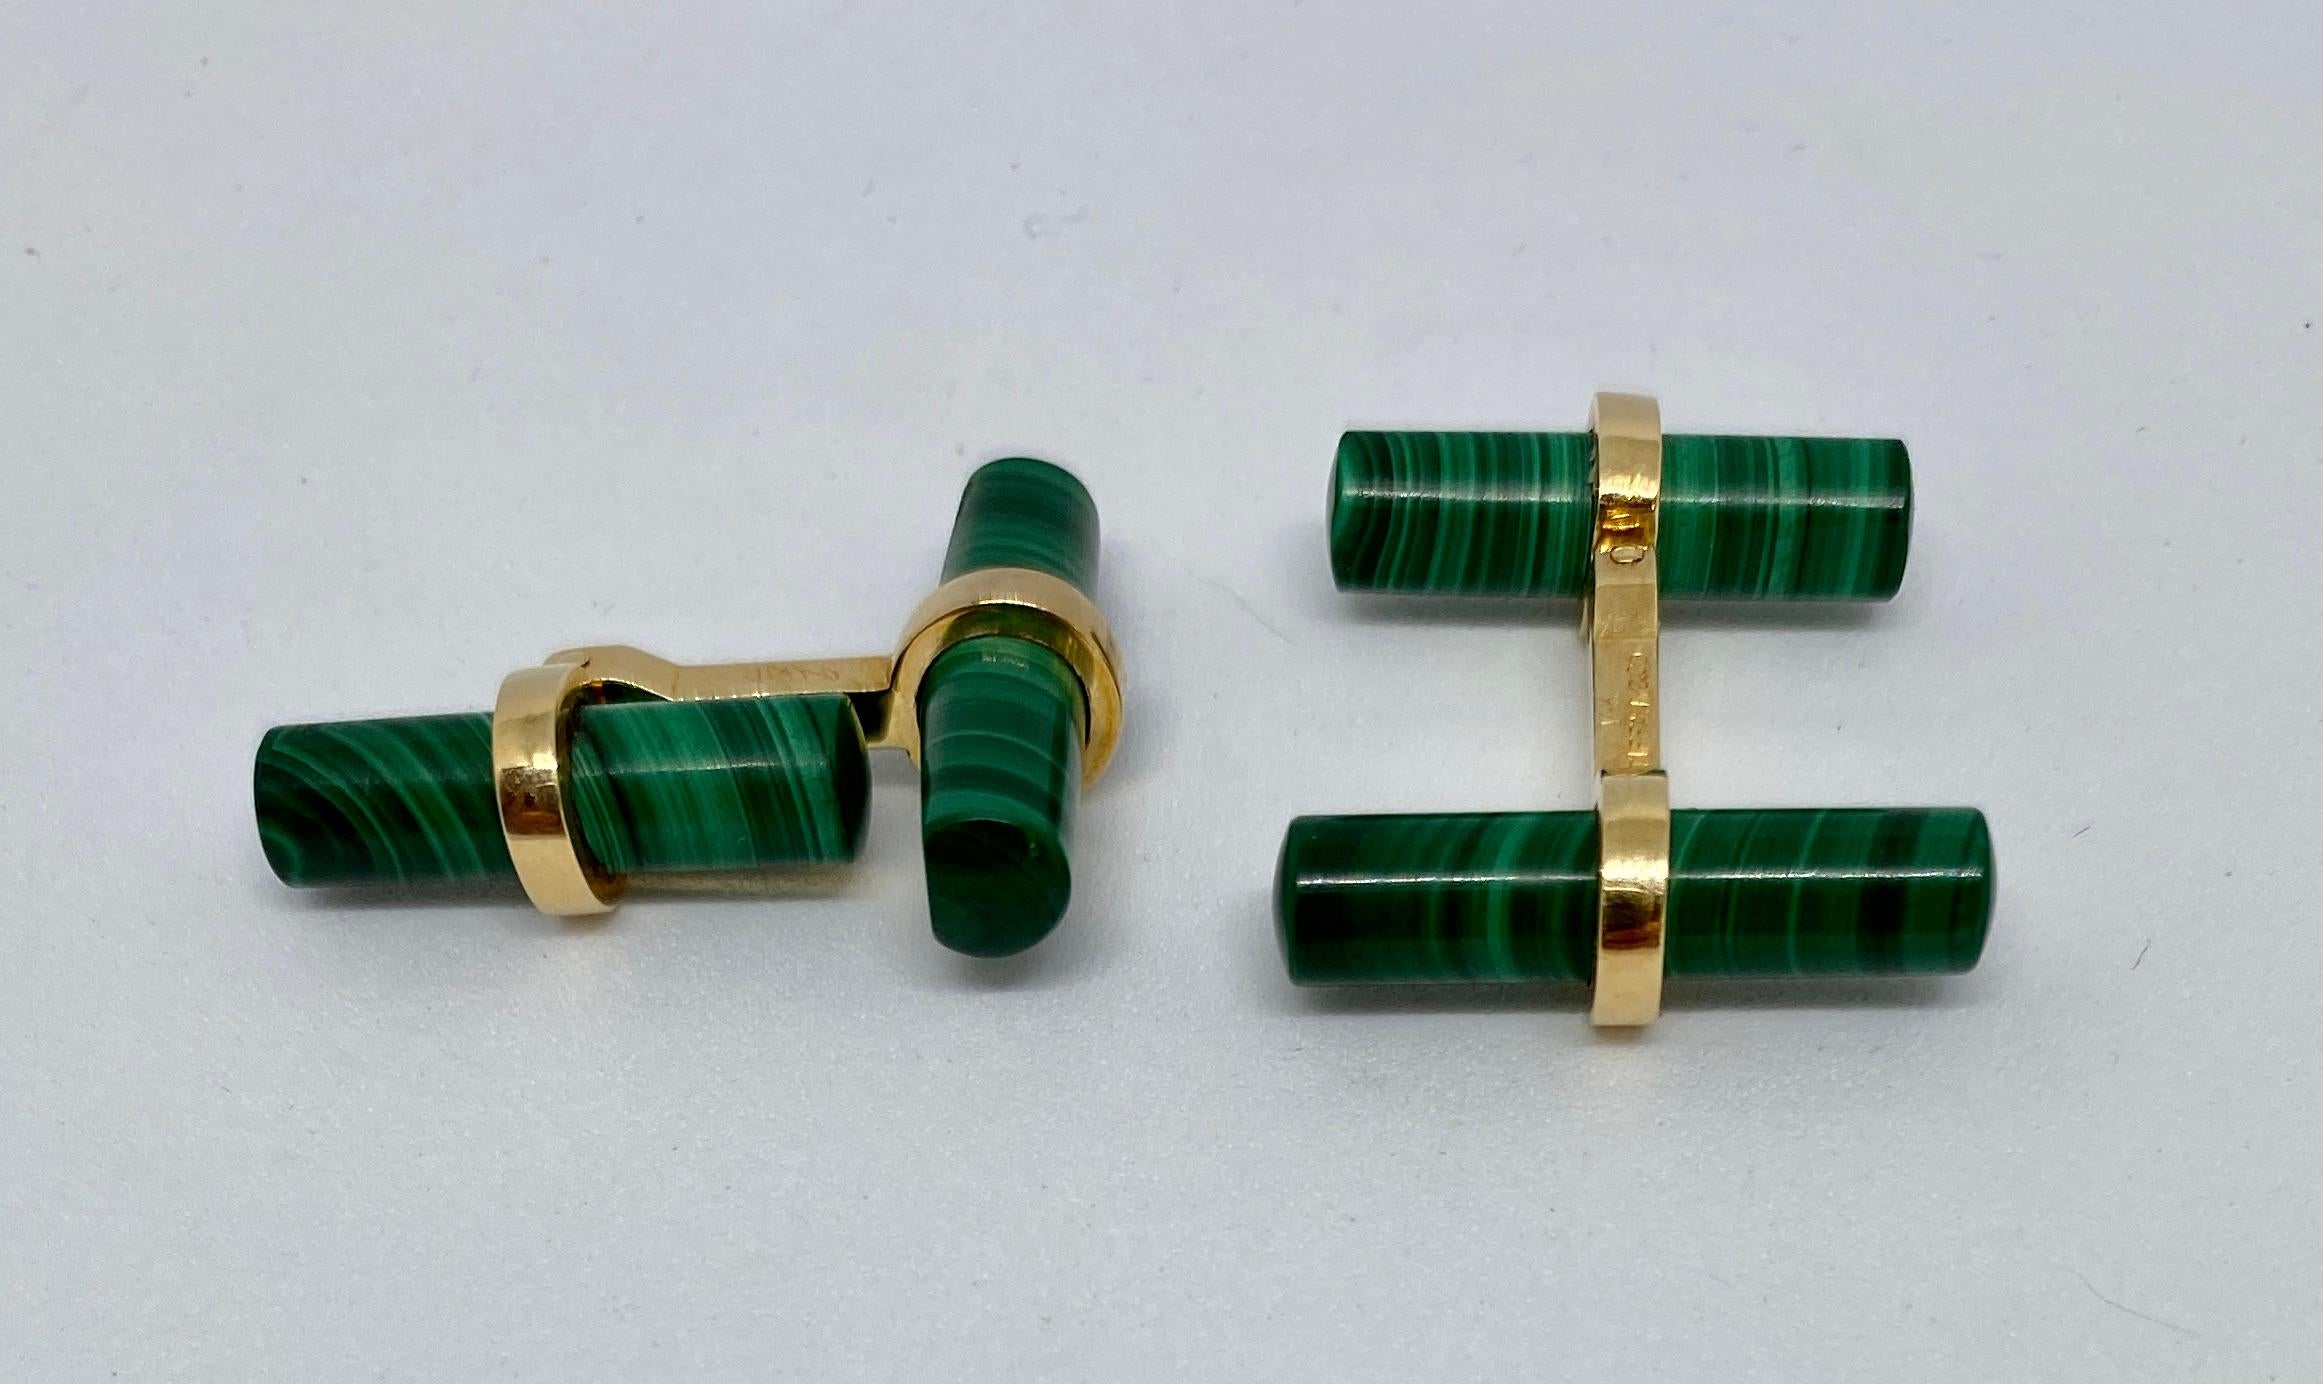 Contemporary Yellow Gold Cufflinks with Malachite Batons by Tiffany & Co.